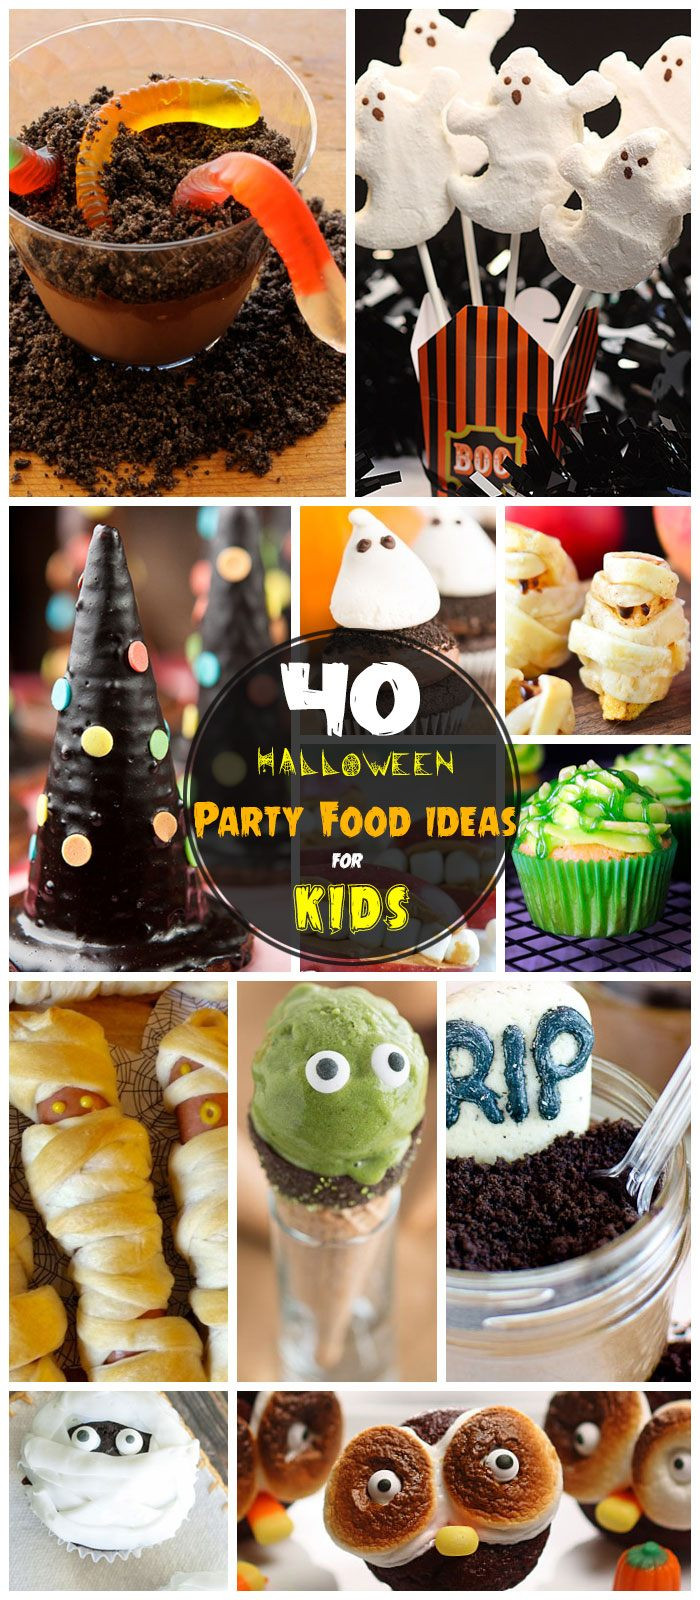 Kids Halloween Party Food Ideas
 40 Halloween Party Food Ideas for Kids